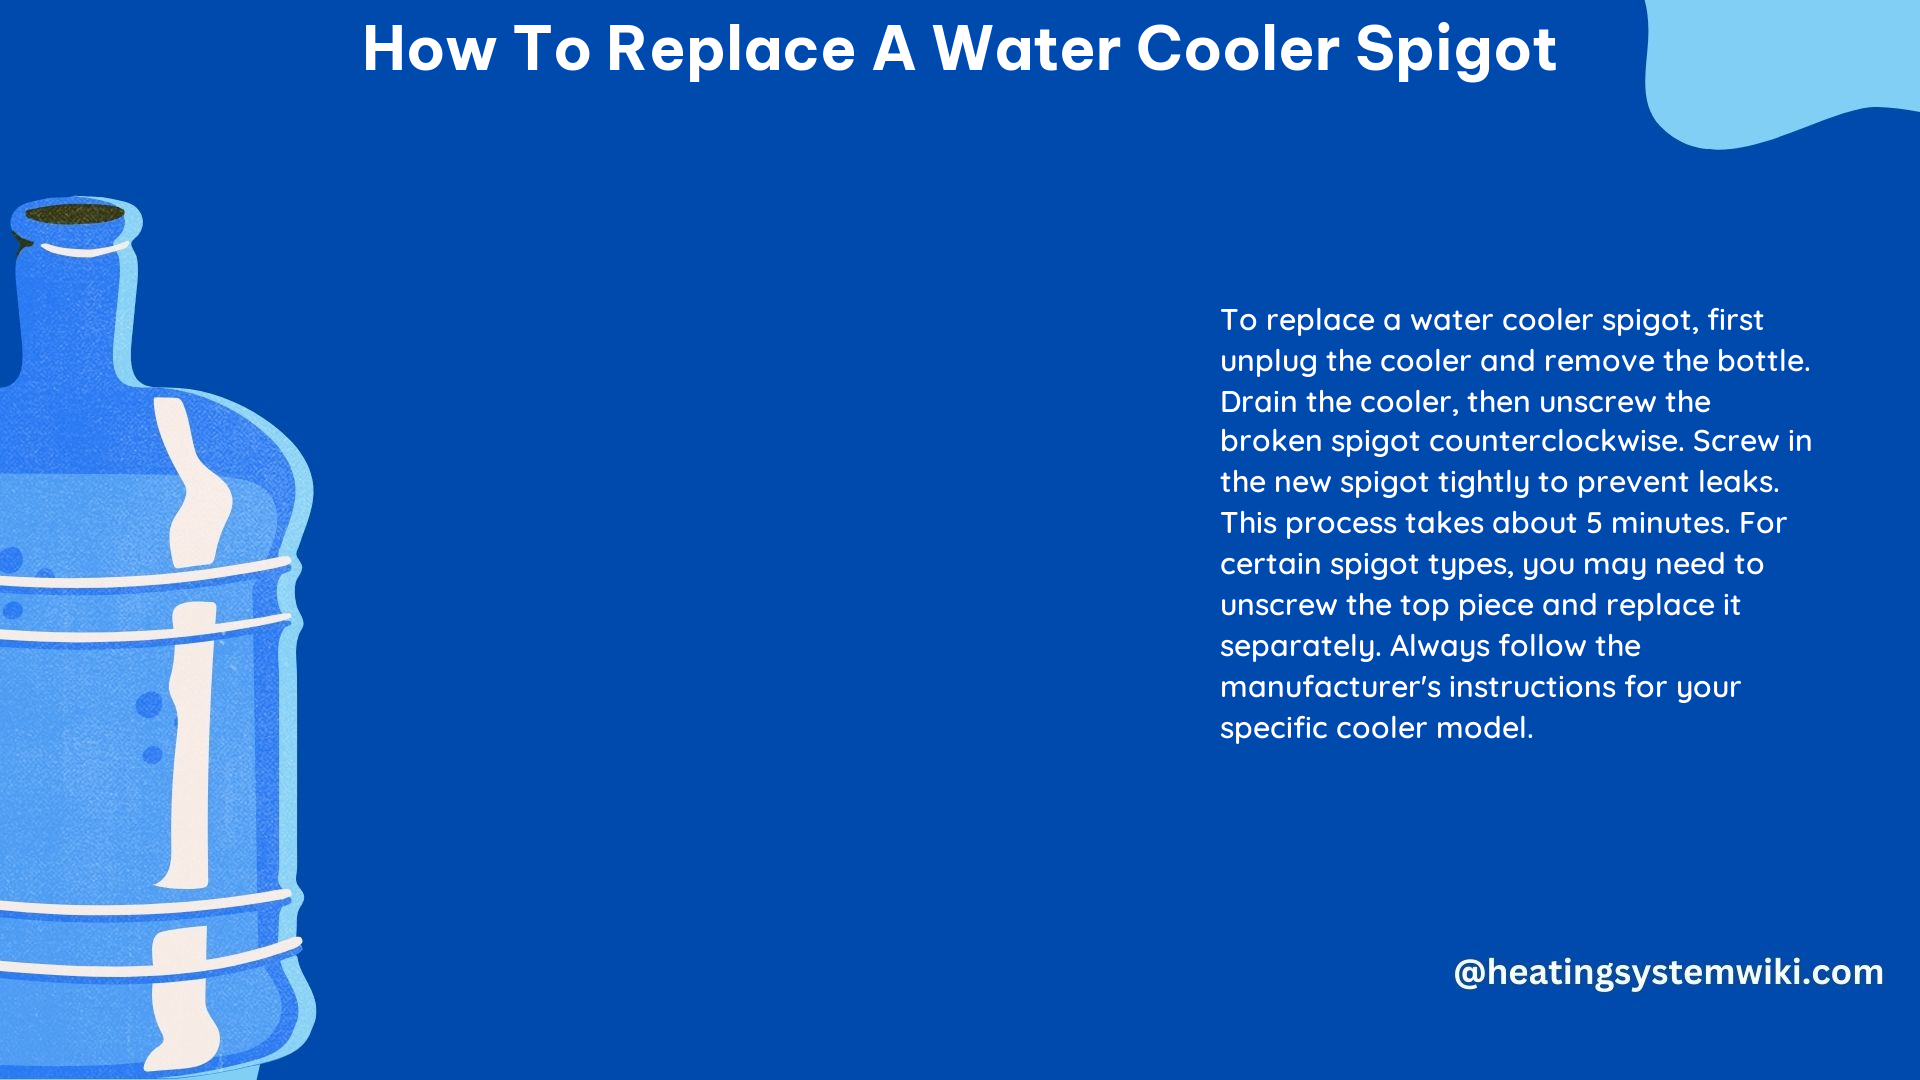 How to Replace a Water Cooler Spigot